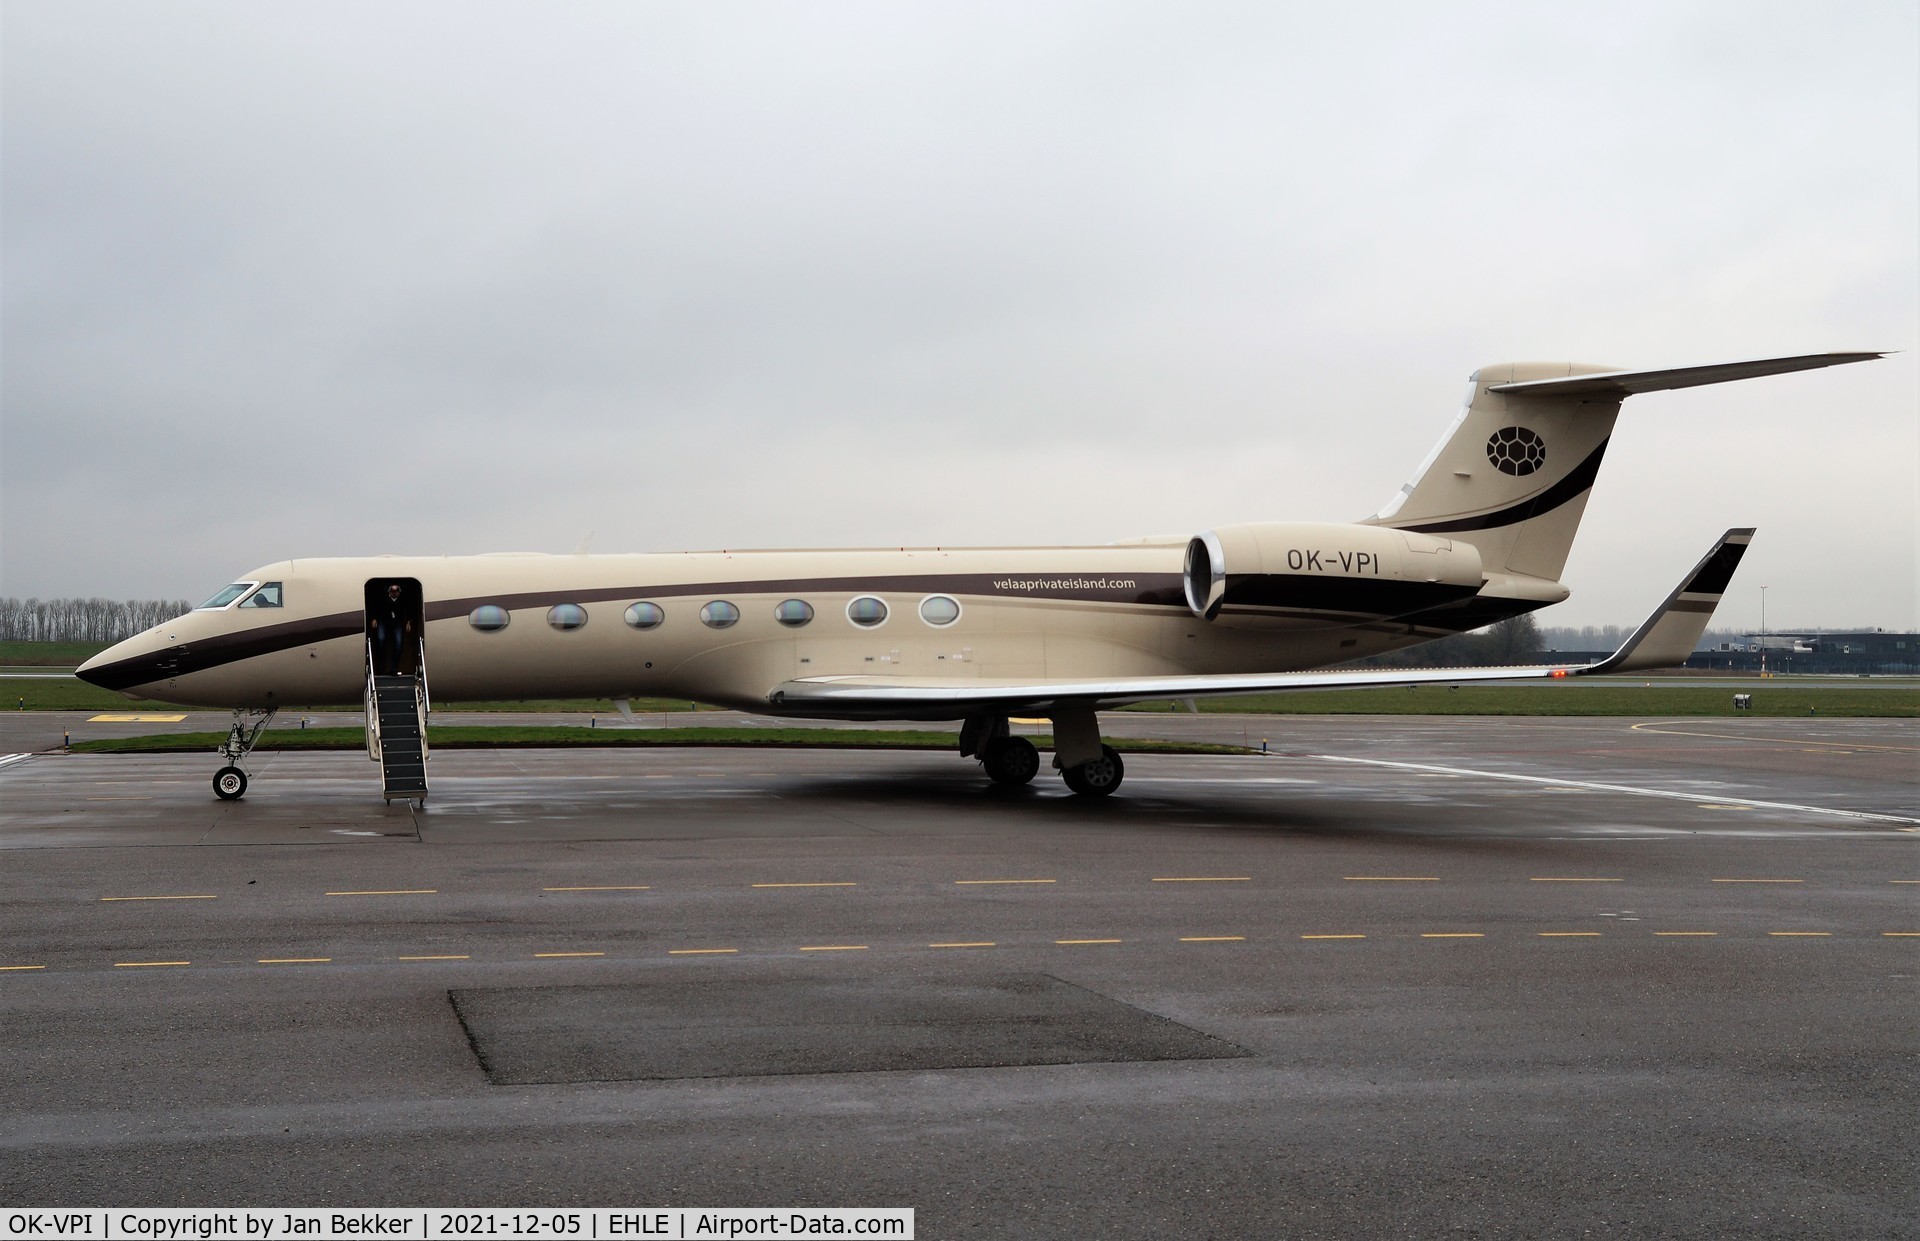 OK-VPI, 2008 Gulfstream Aerospace GV-SP (G550) C/N 5189, Arriving Lelystad Airport. Probably for a new livery by Satys